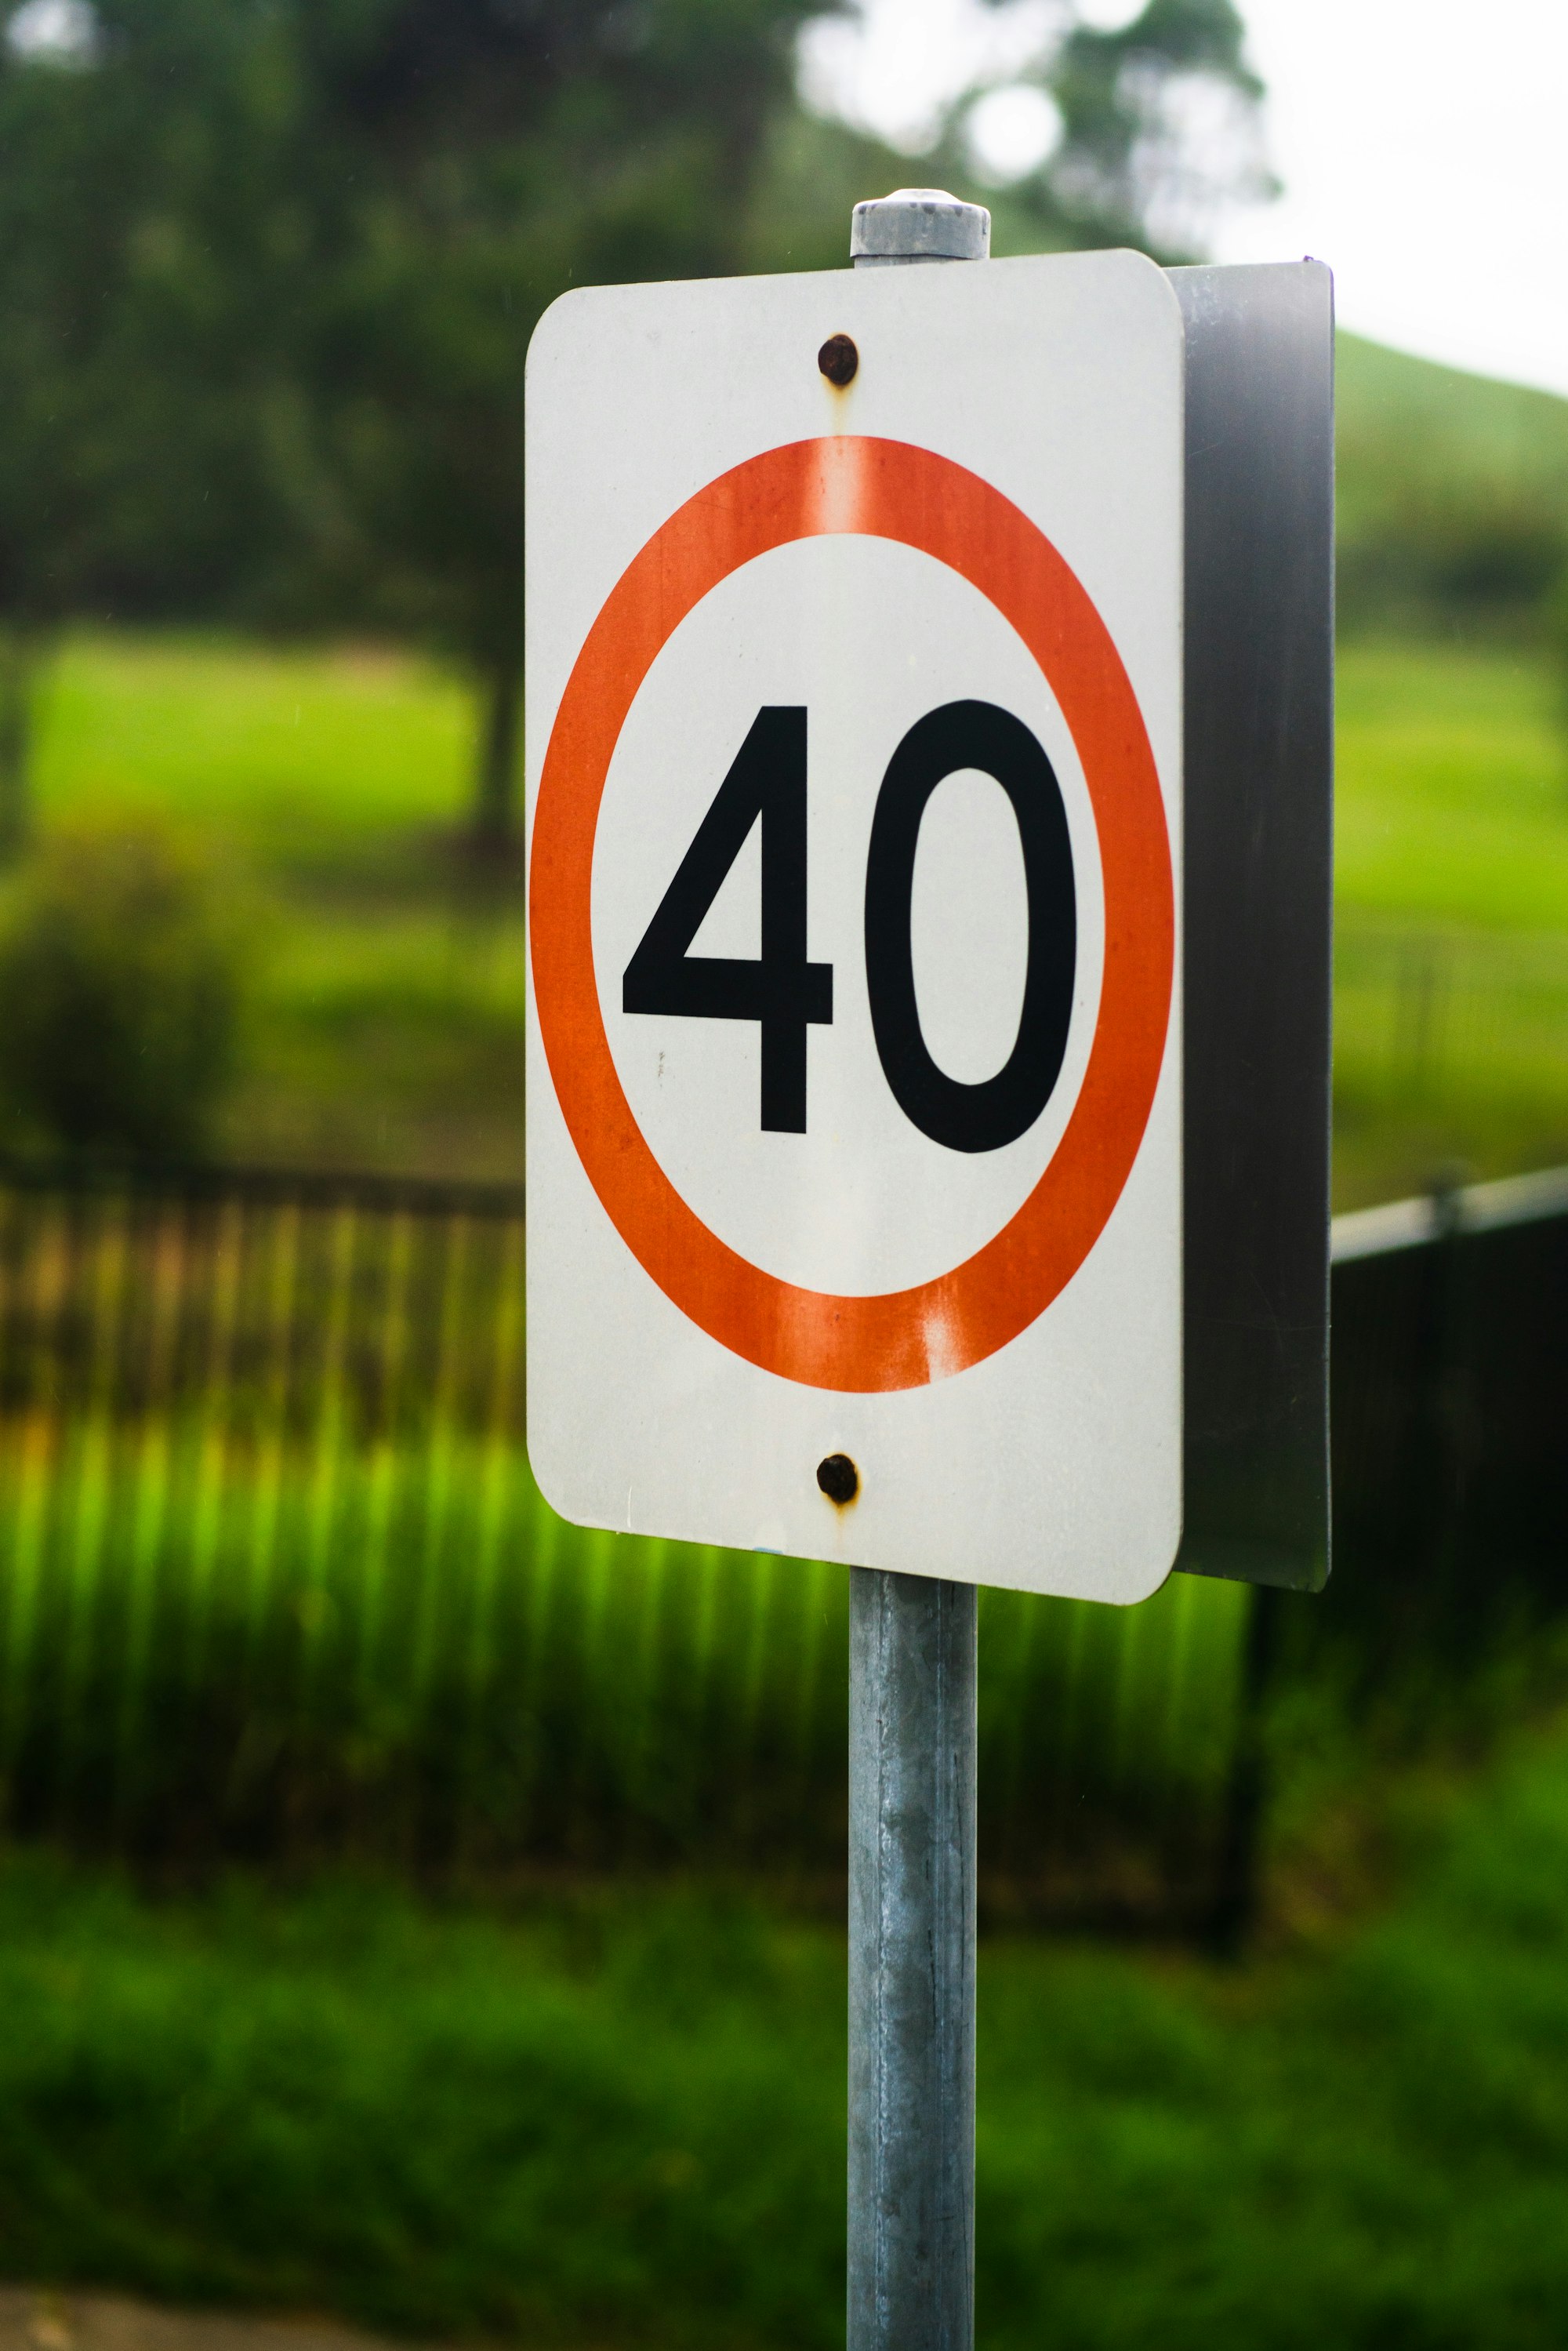 County Antrim man caught doing 71mph in 40mph zone not offering 'any silly excuses'